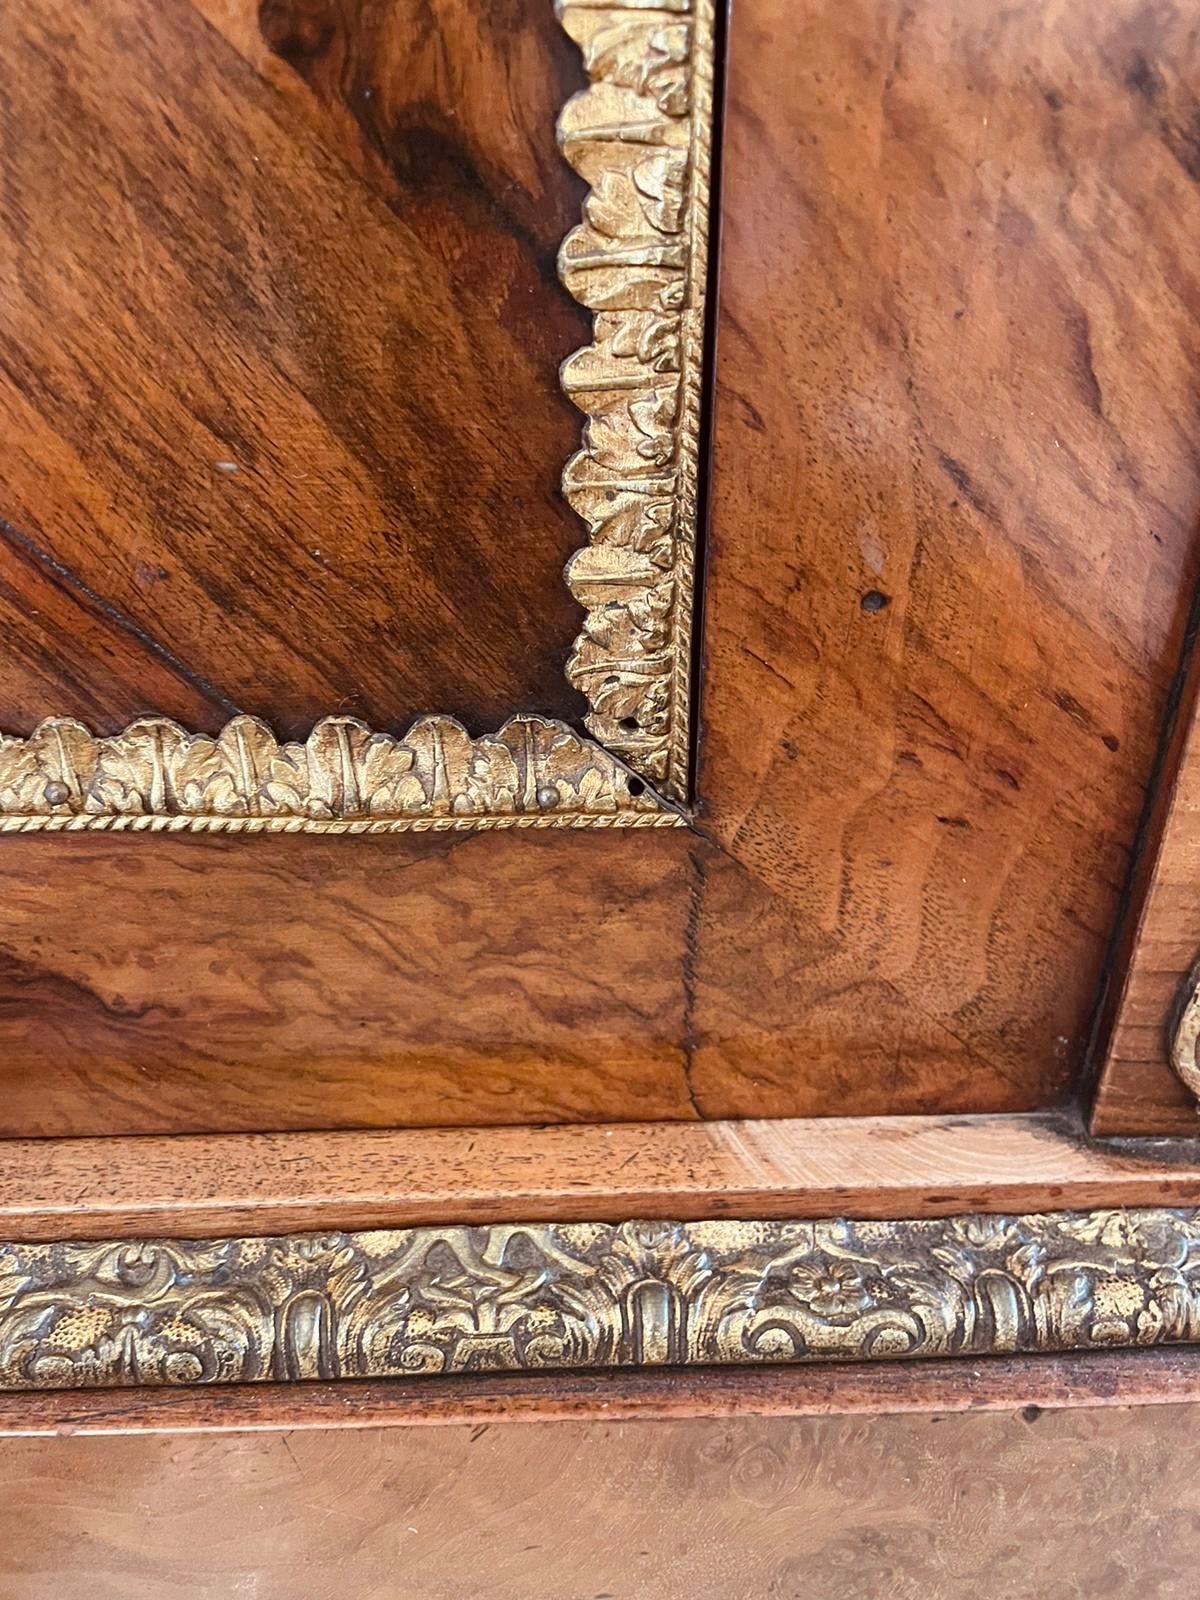 Outstanding quality antique Victorian burr walnut floral marquetry inlaid side cabinet having a magnificent figured walnut top with stunning marquetry inlaid frieze above an outstanding quality burr walnut floral marquetry inlaid panel door with